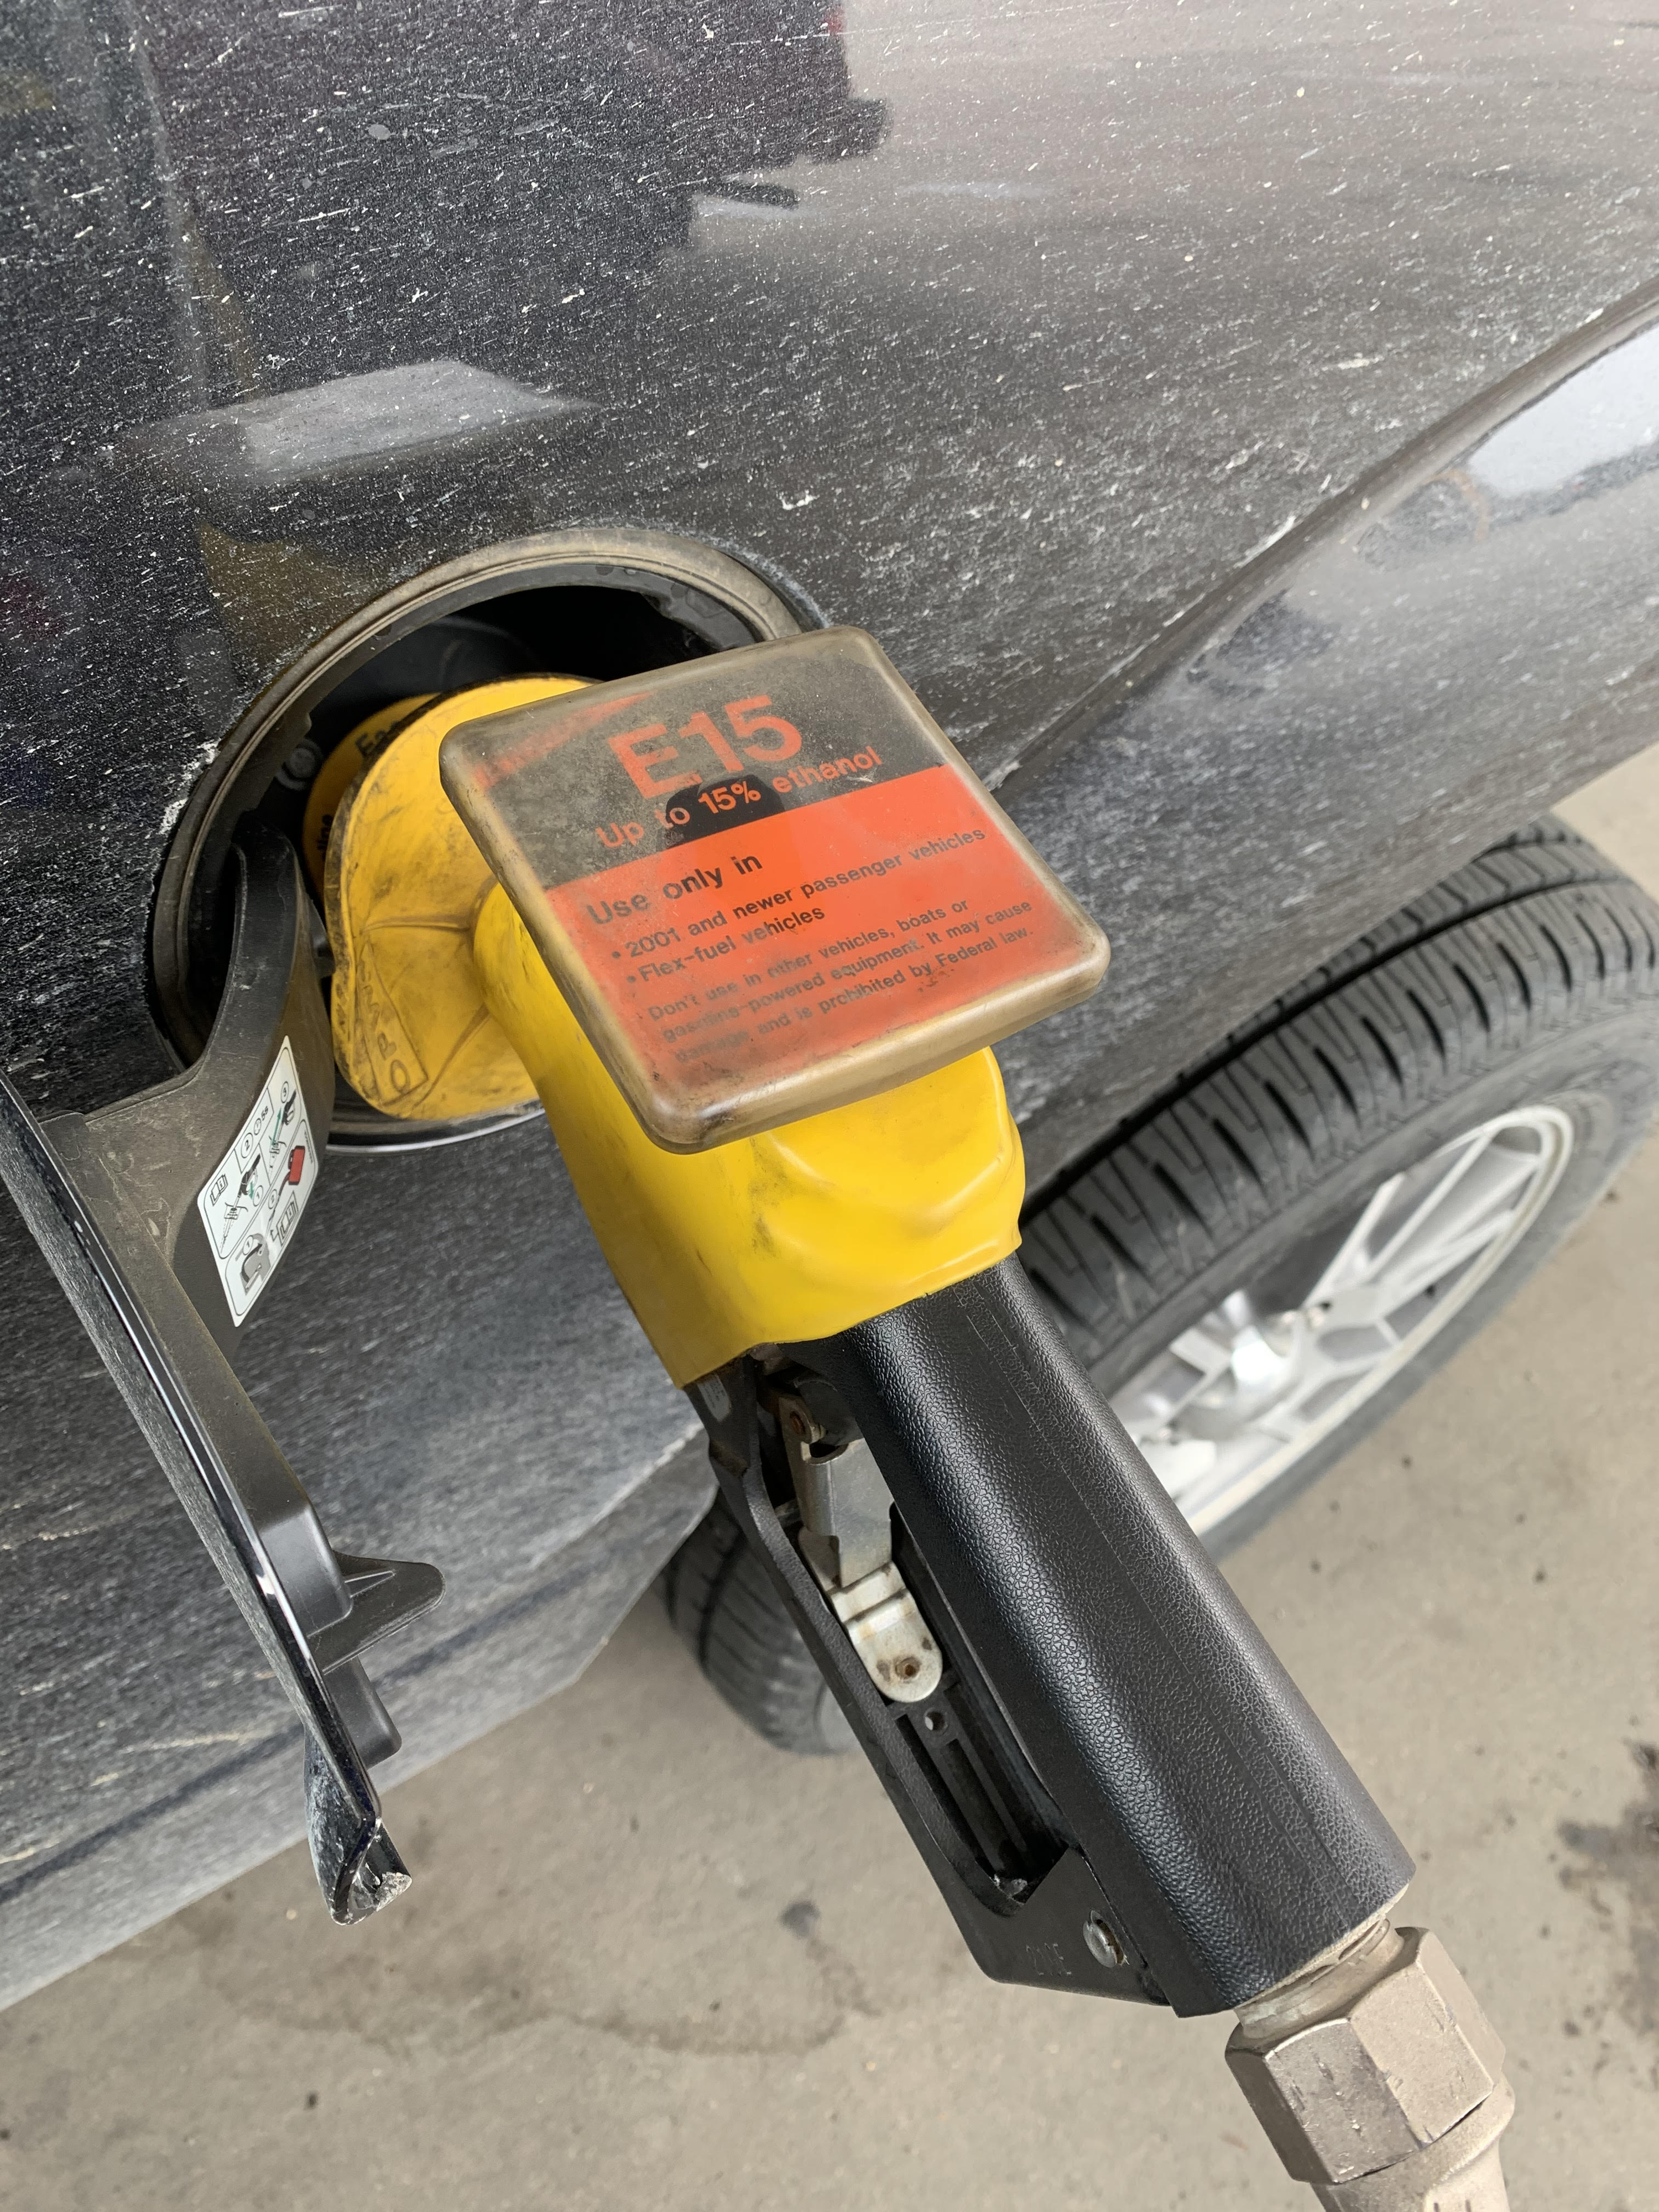 Afternoon Ag News, October 27, 2021: Gas prices continue to climb